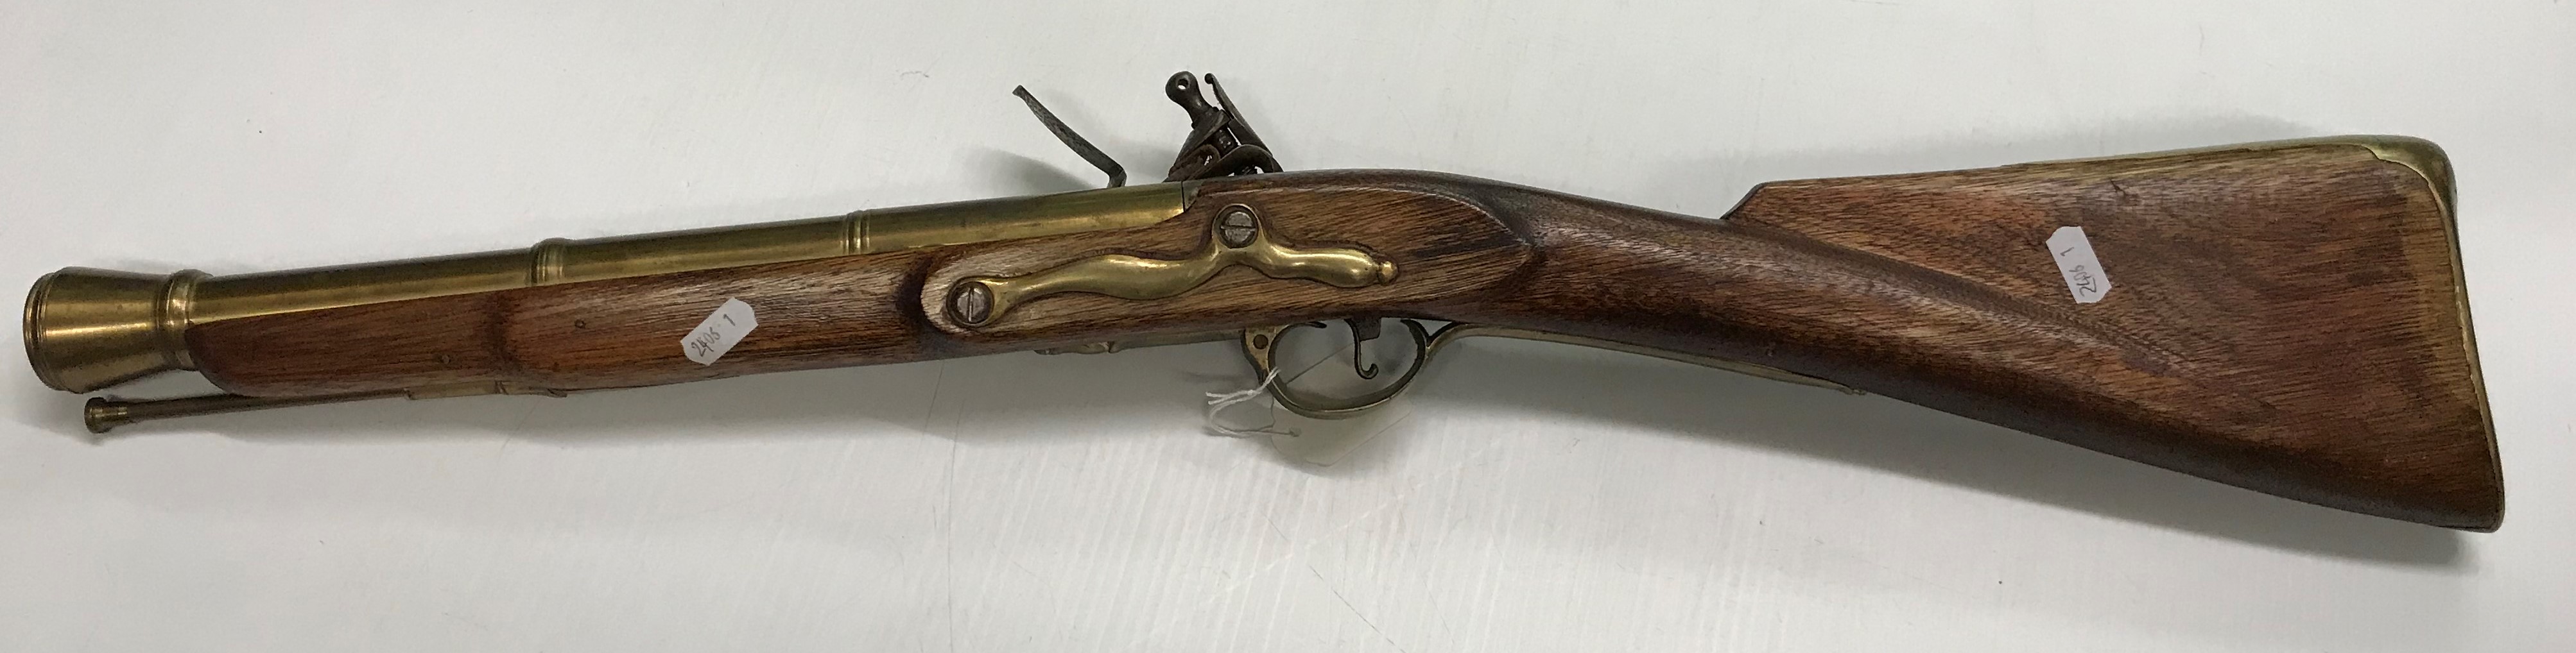 A reproduction Continental sporting flintlock muzzle loading carbine or blunderbuss black powder - Image 3 of 3